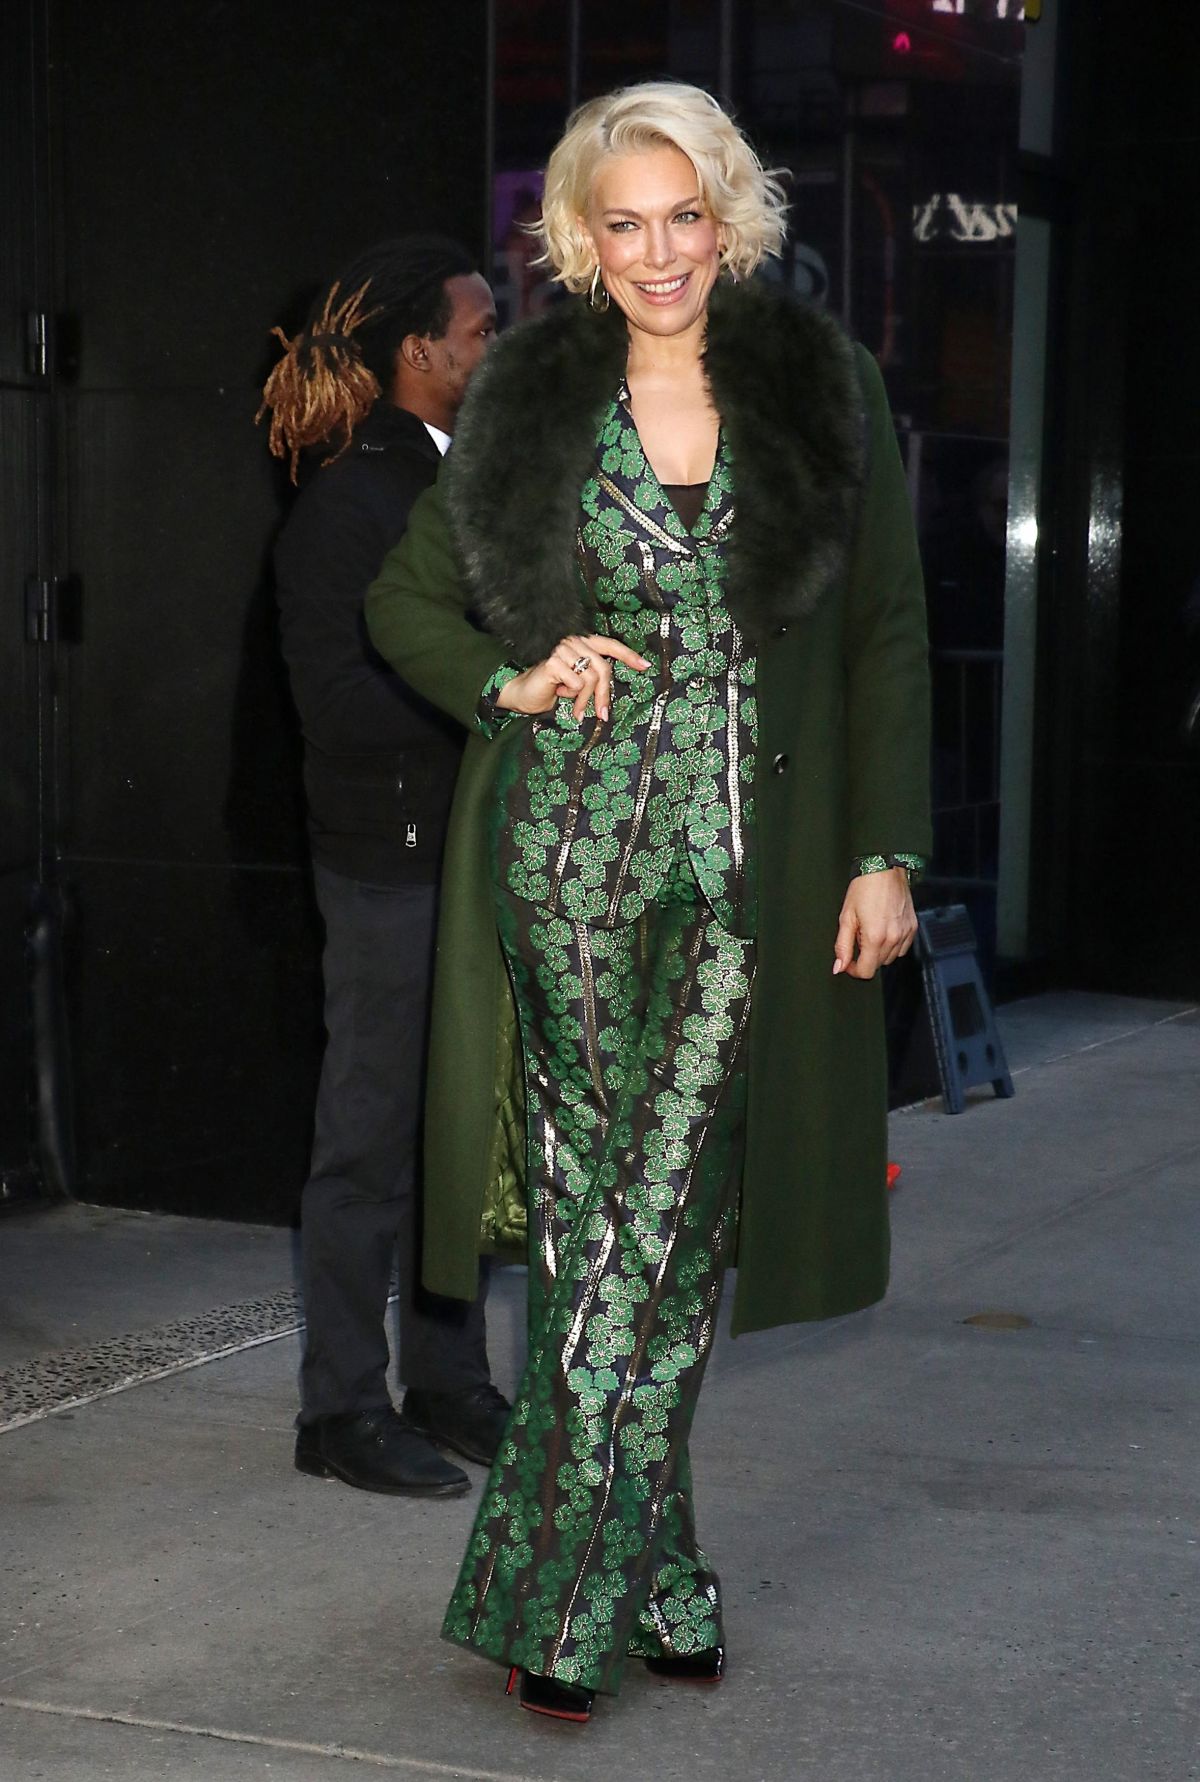 Hannah Waddingham in Green Floral Suit at Good Morning America in NYC 1